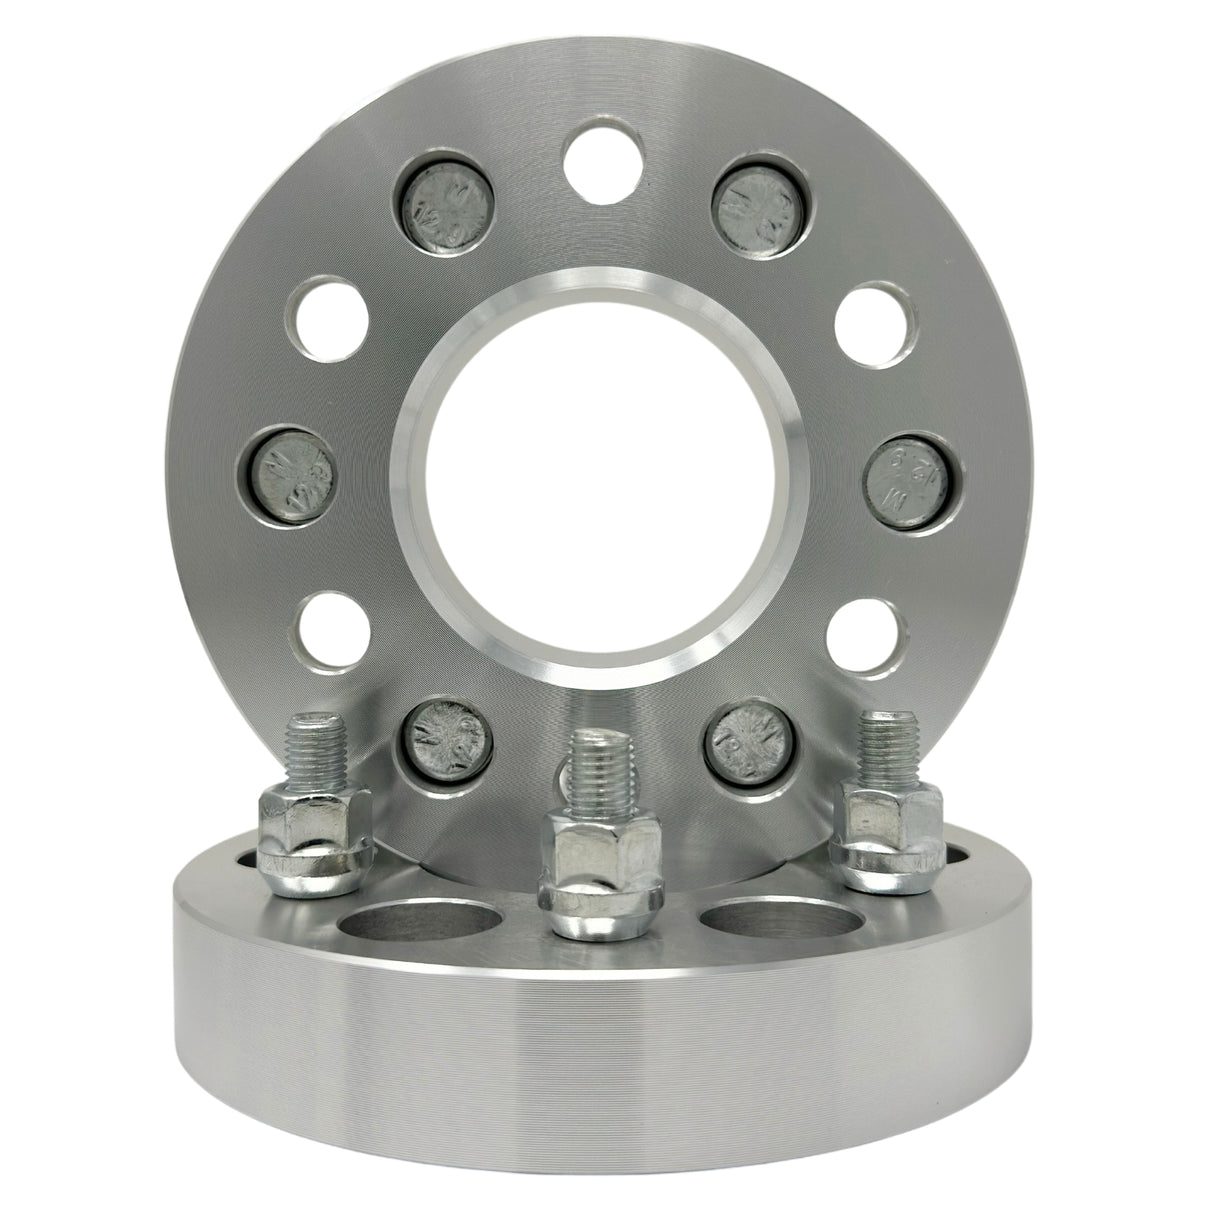 6x4.5 to 6x5.5 Wheel Adapters 1.5" Inch (38mm) 12x1.5 Studs & Lug Nuts 71.5mm Center Bore | 6x114.3 to 6x139.7